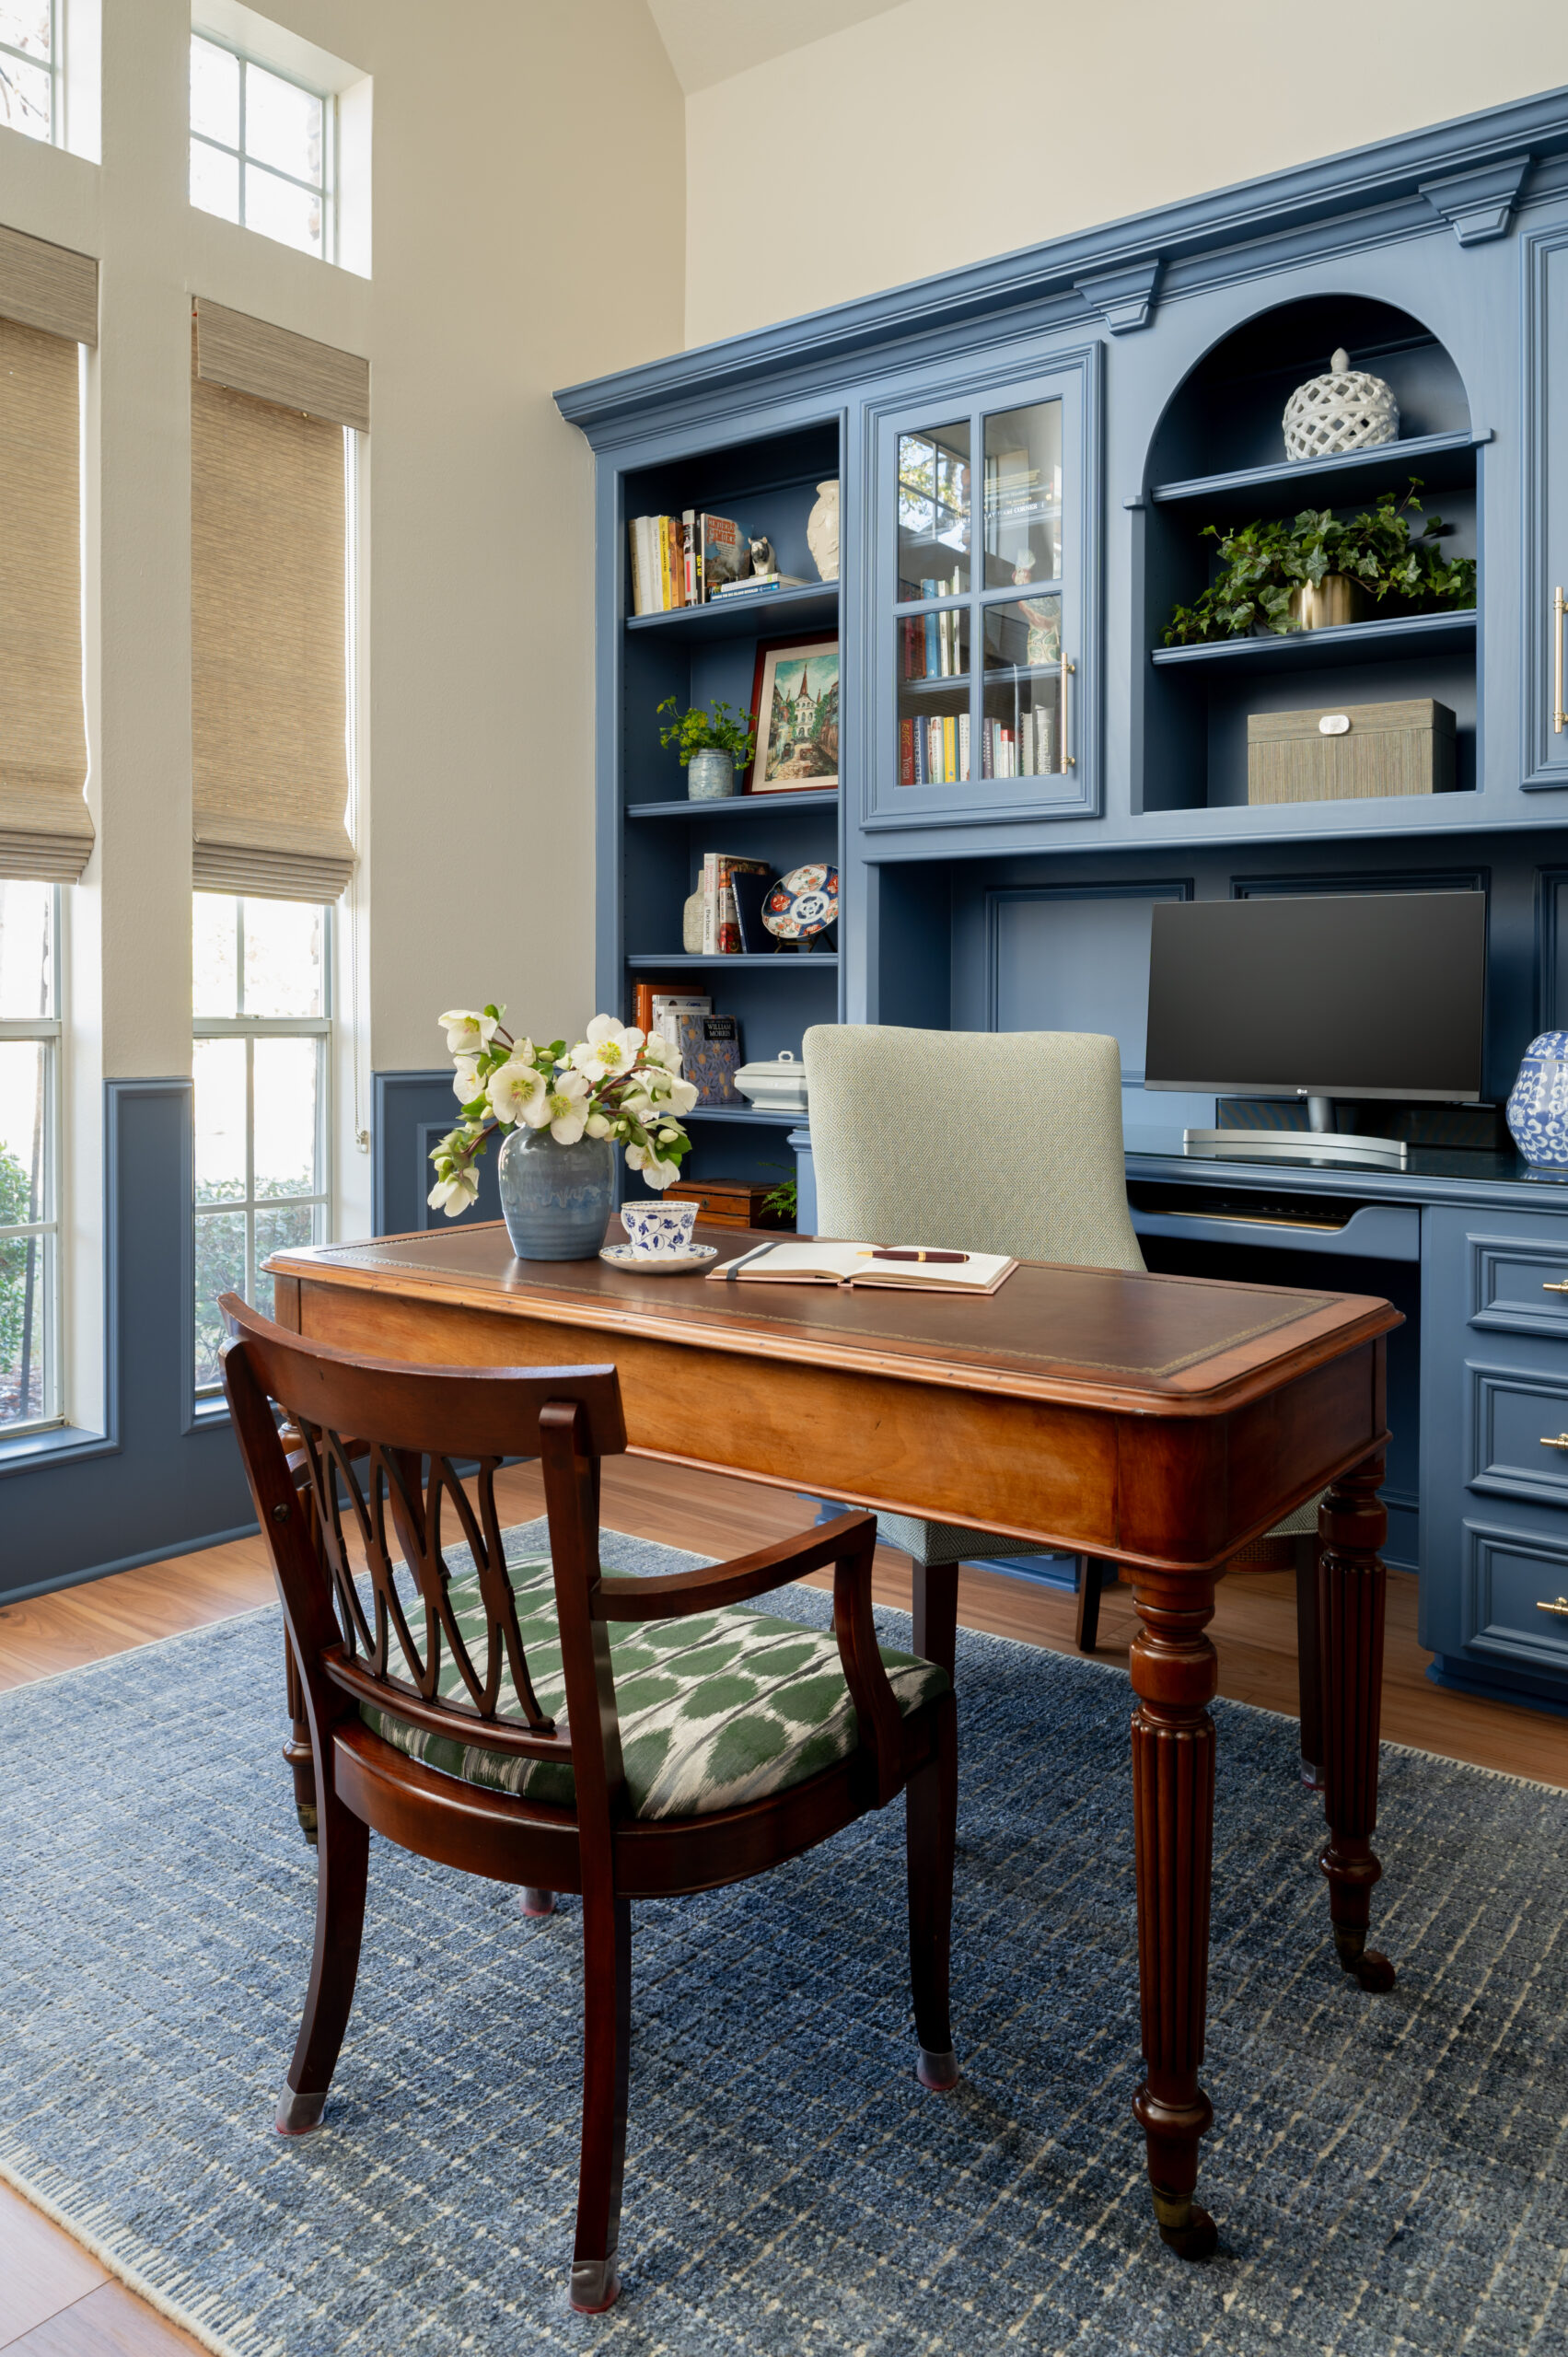 Beautiful office interior design with blue book case and wooden desk and chair